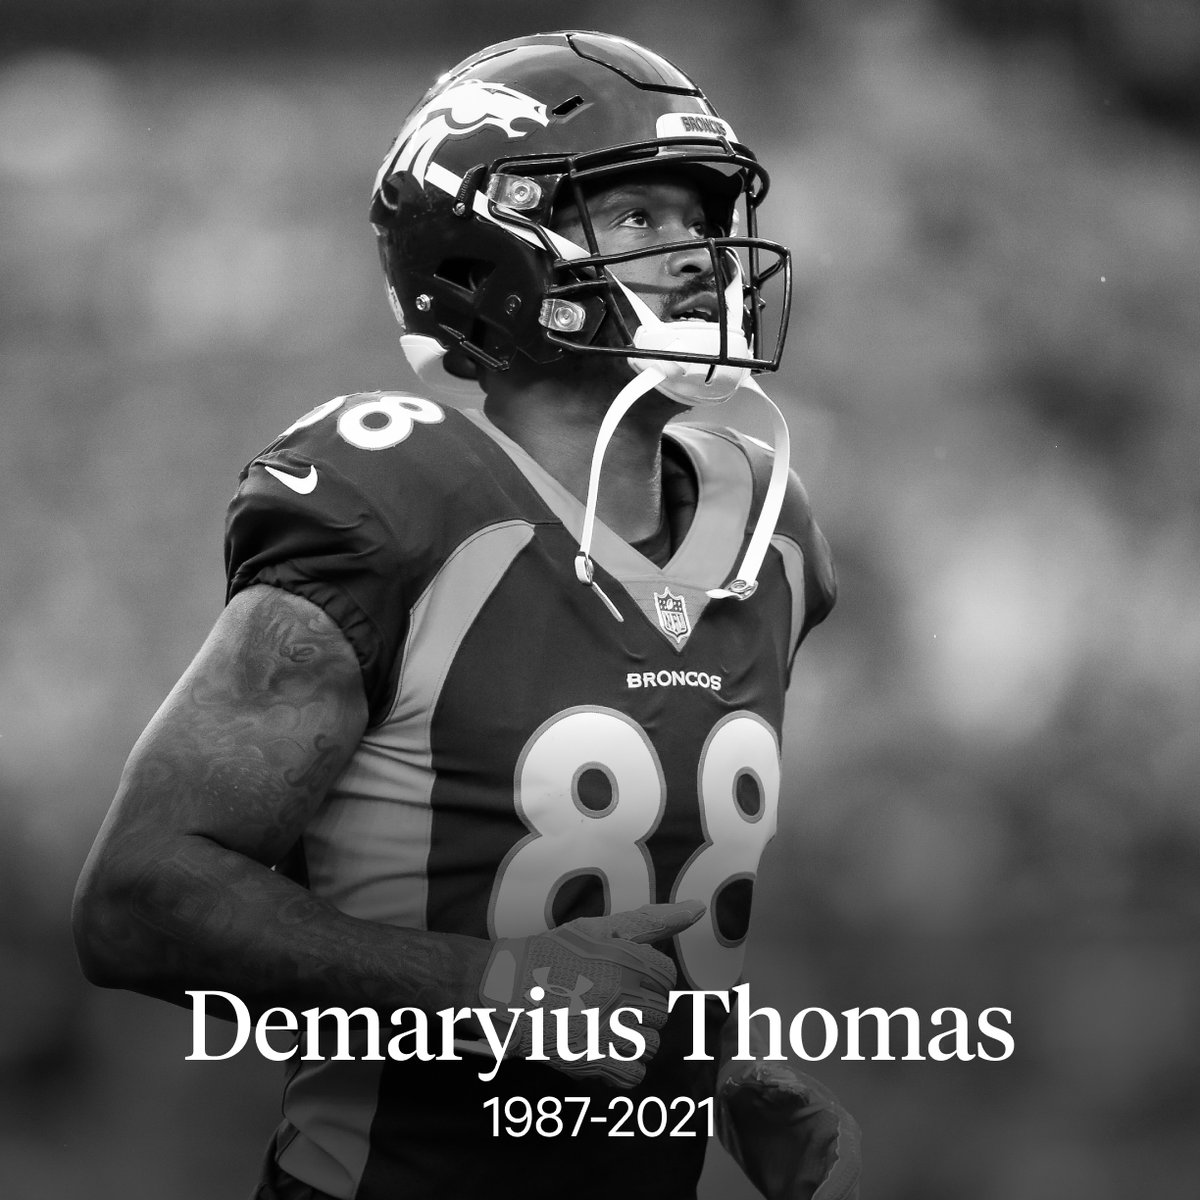 Former NFL WR Demaryius Thomas has died at the age of 33, The Athletic confirmed through Roswell, Georgia Police on Thursday evening.  Thomas — a first-round pick out of Georgia Tech — was a 5x Pro Bowler from 2012-2016 with the Broncos. theathletic.com/news/former-br…